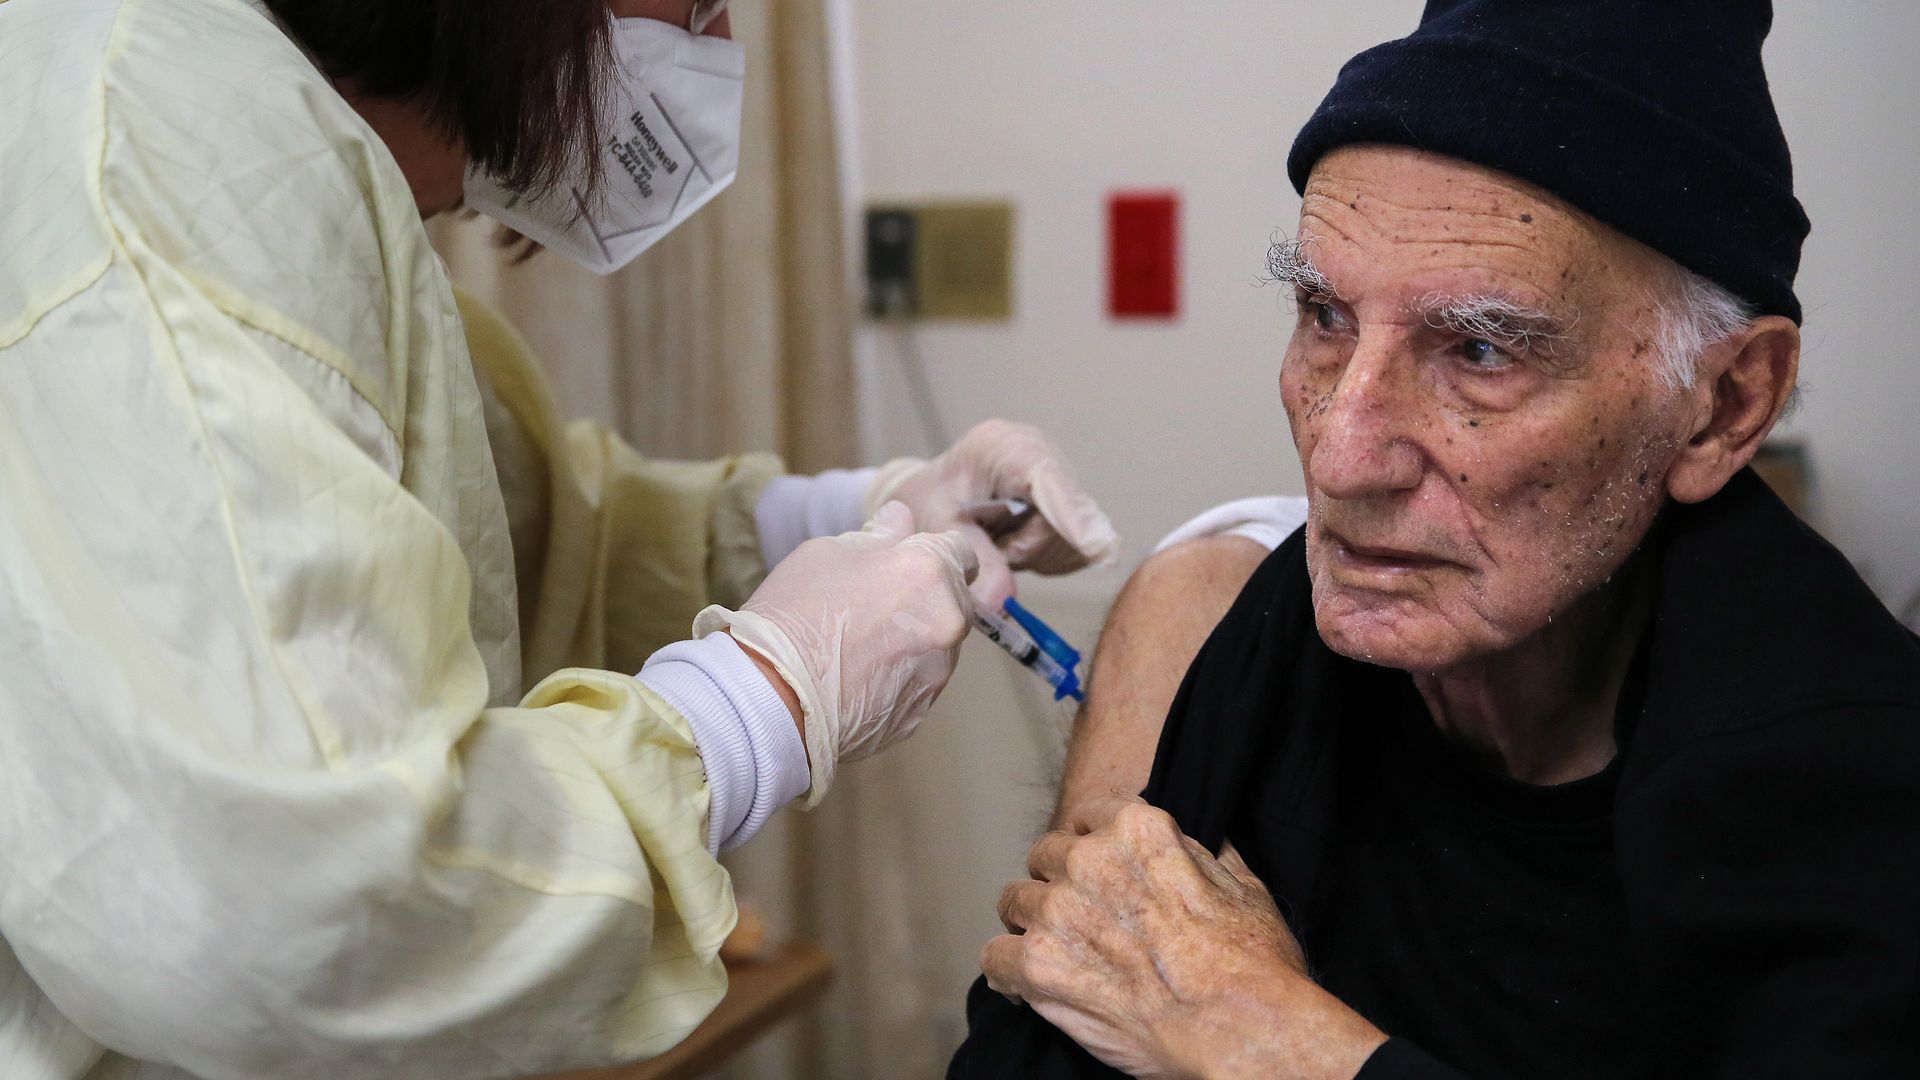 Photo of a person wearing a black hat getting the Moderna vaccine from a masked health care worker